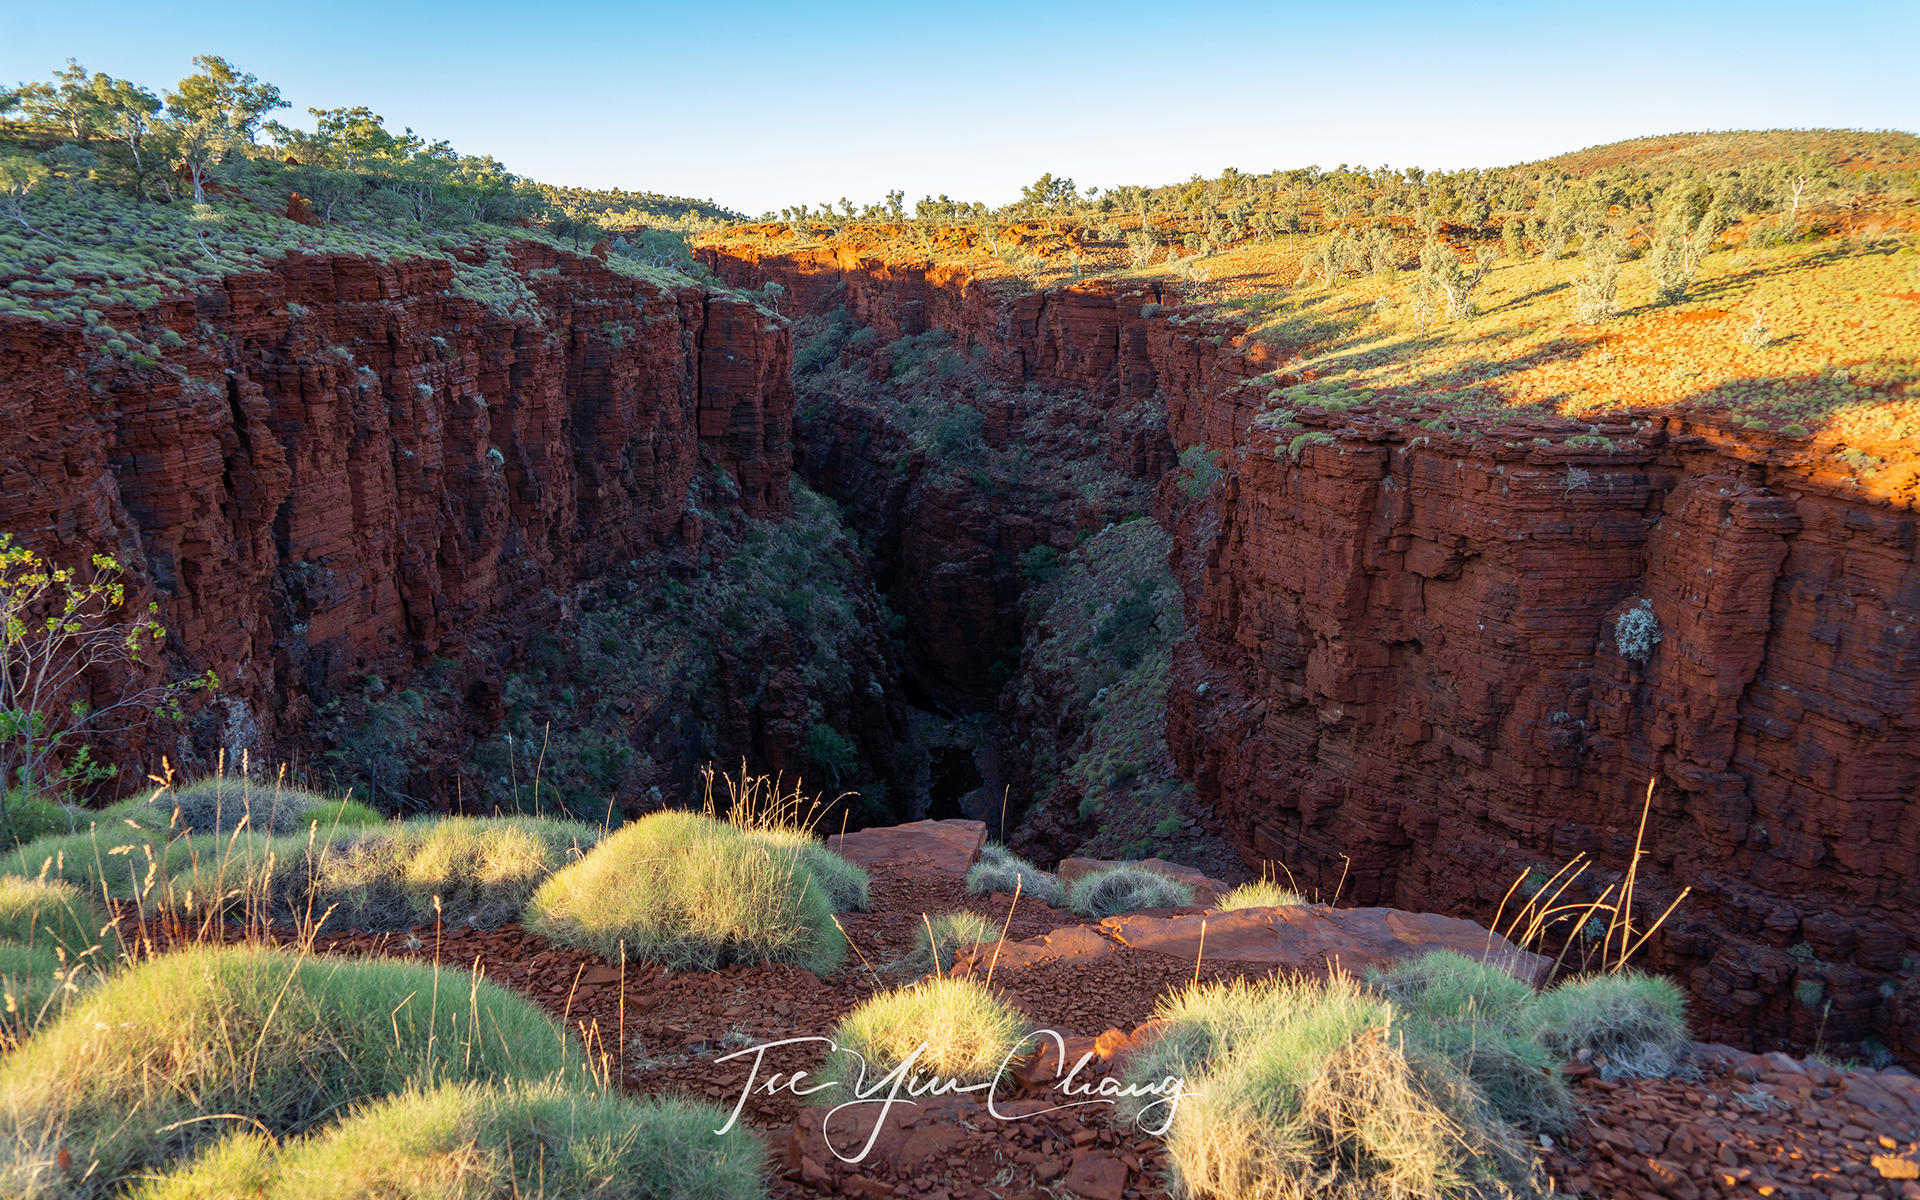 Early evening at Knox Gorge and the sun was enveloping the landscape in a warm amber light